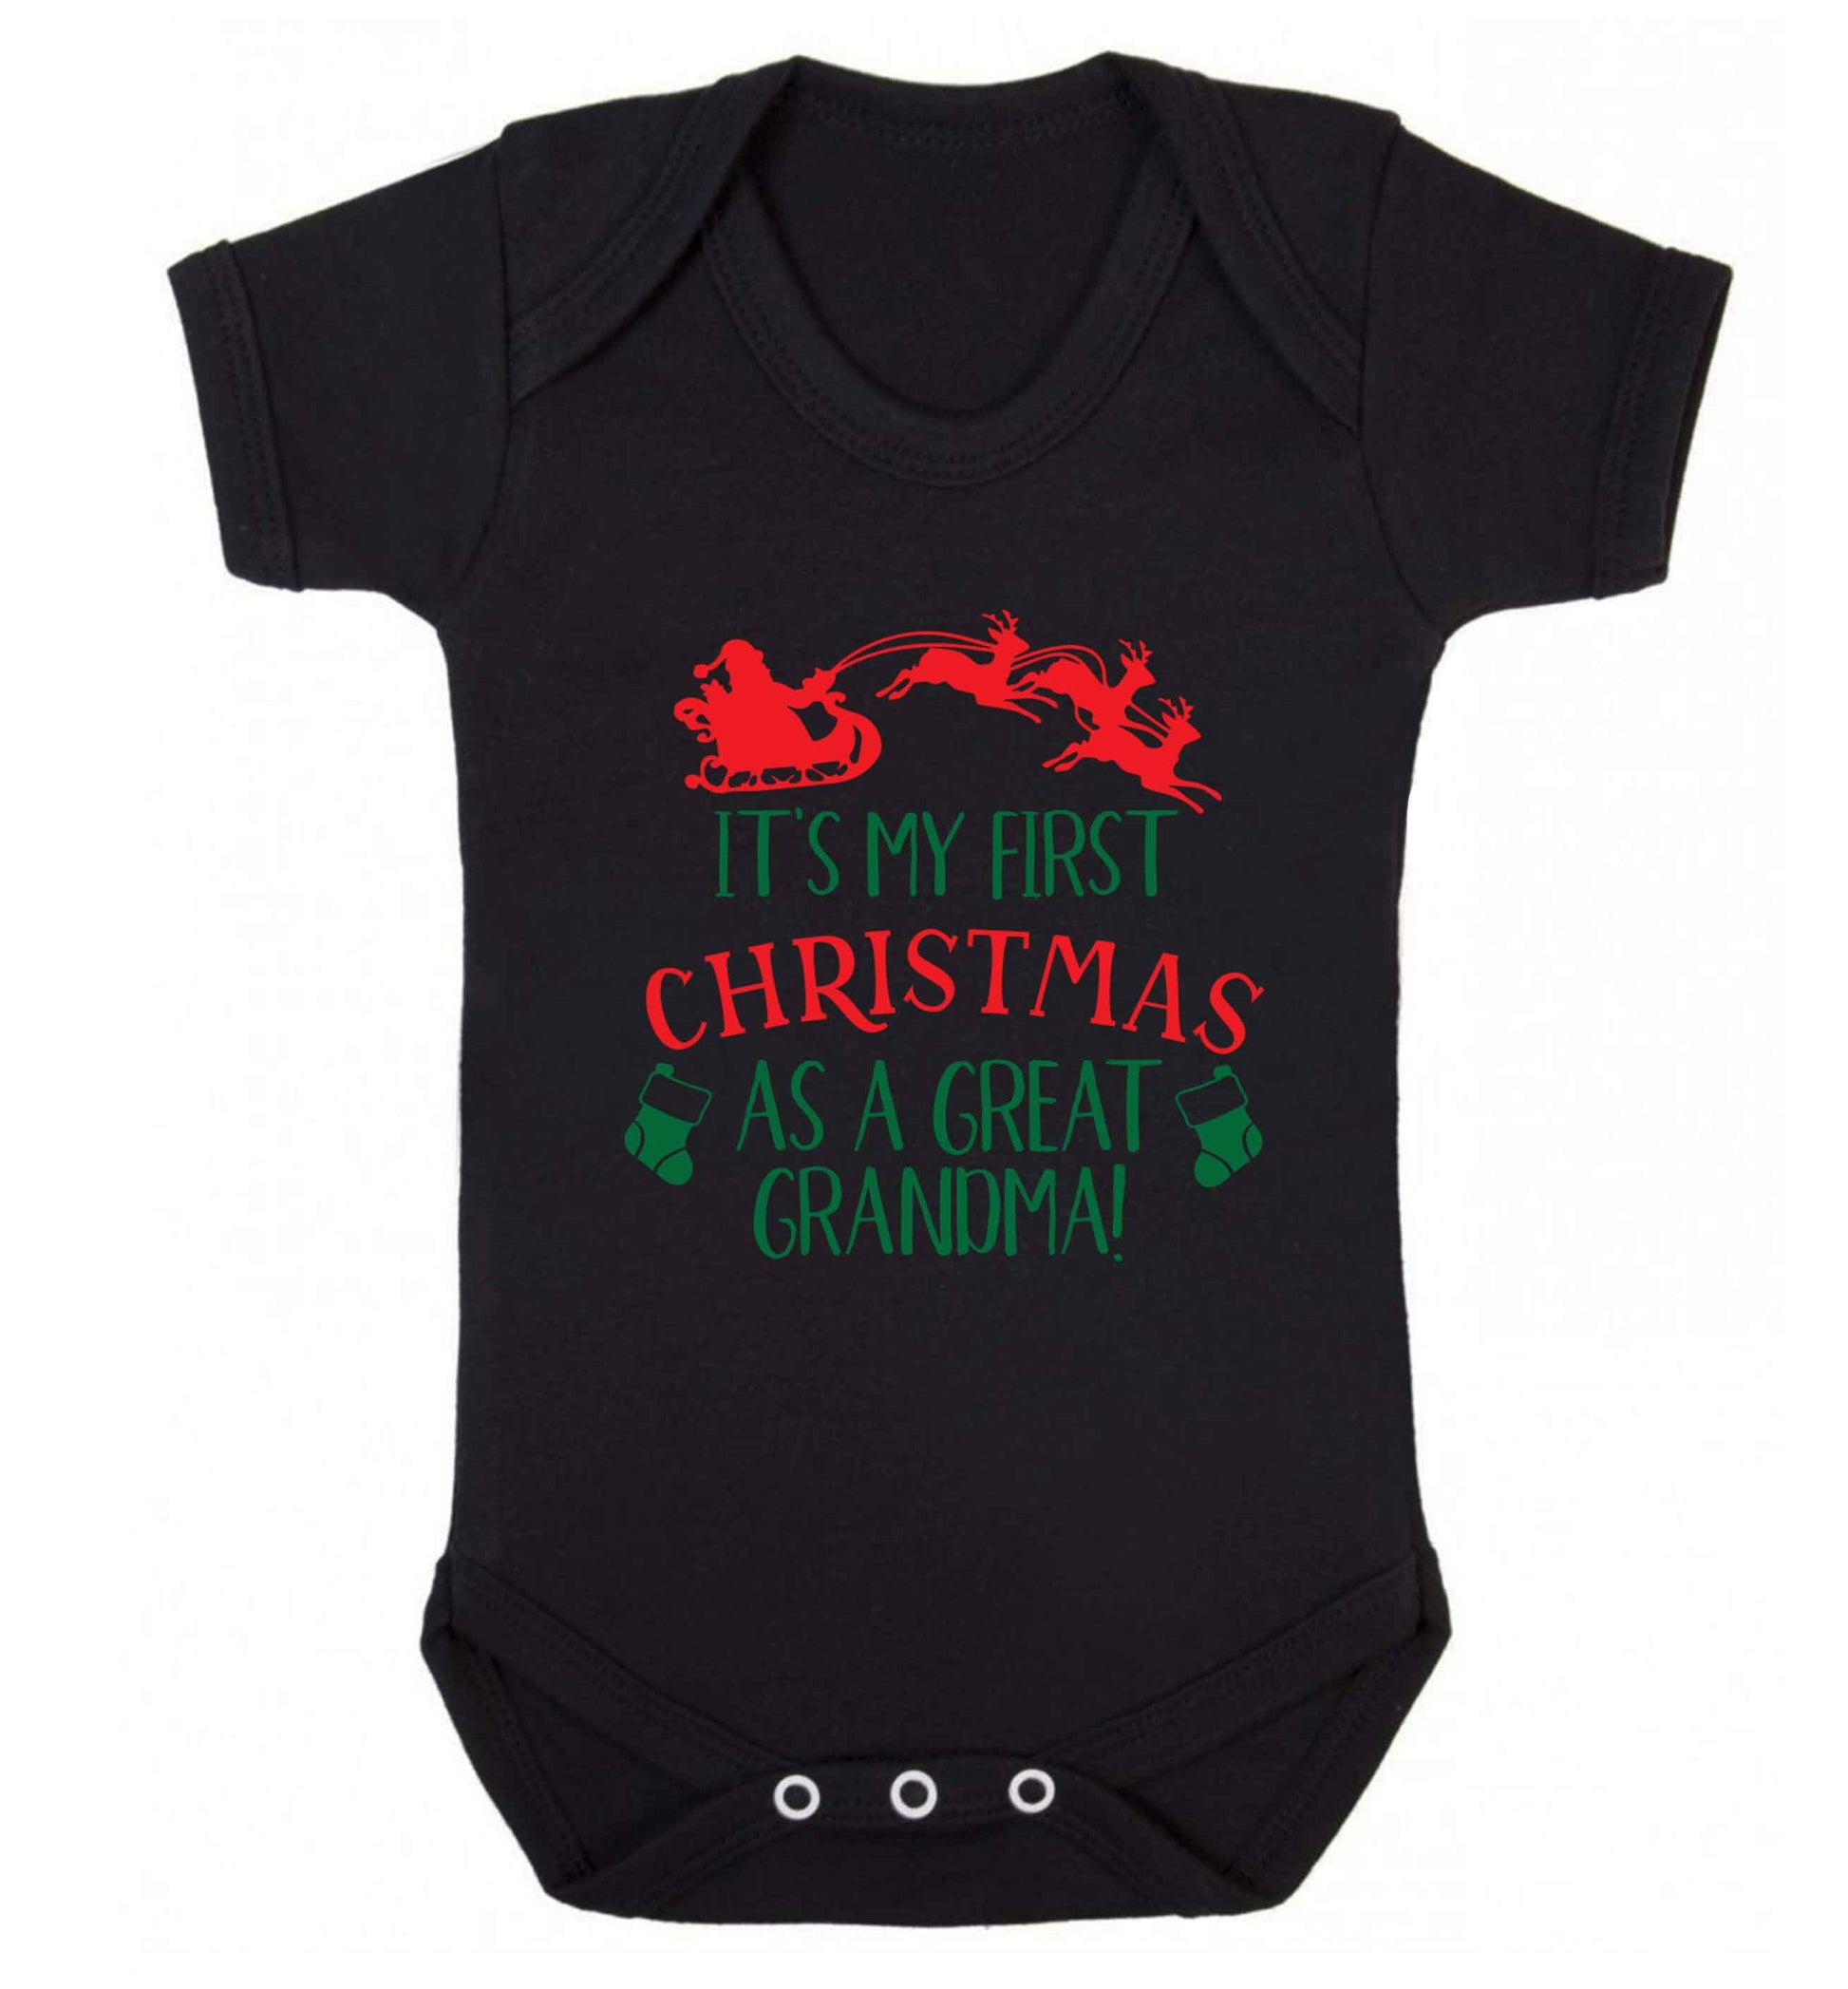 It's my first Christmas as a great grandma! Baby Vest black 18-24 months